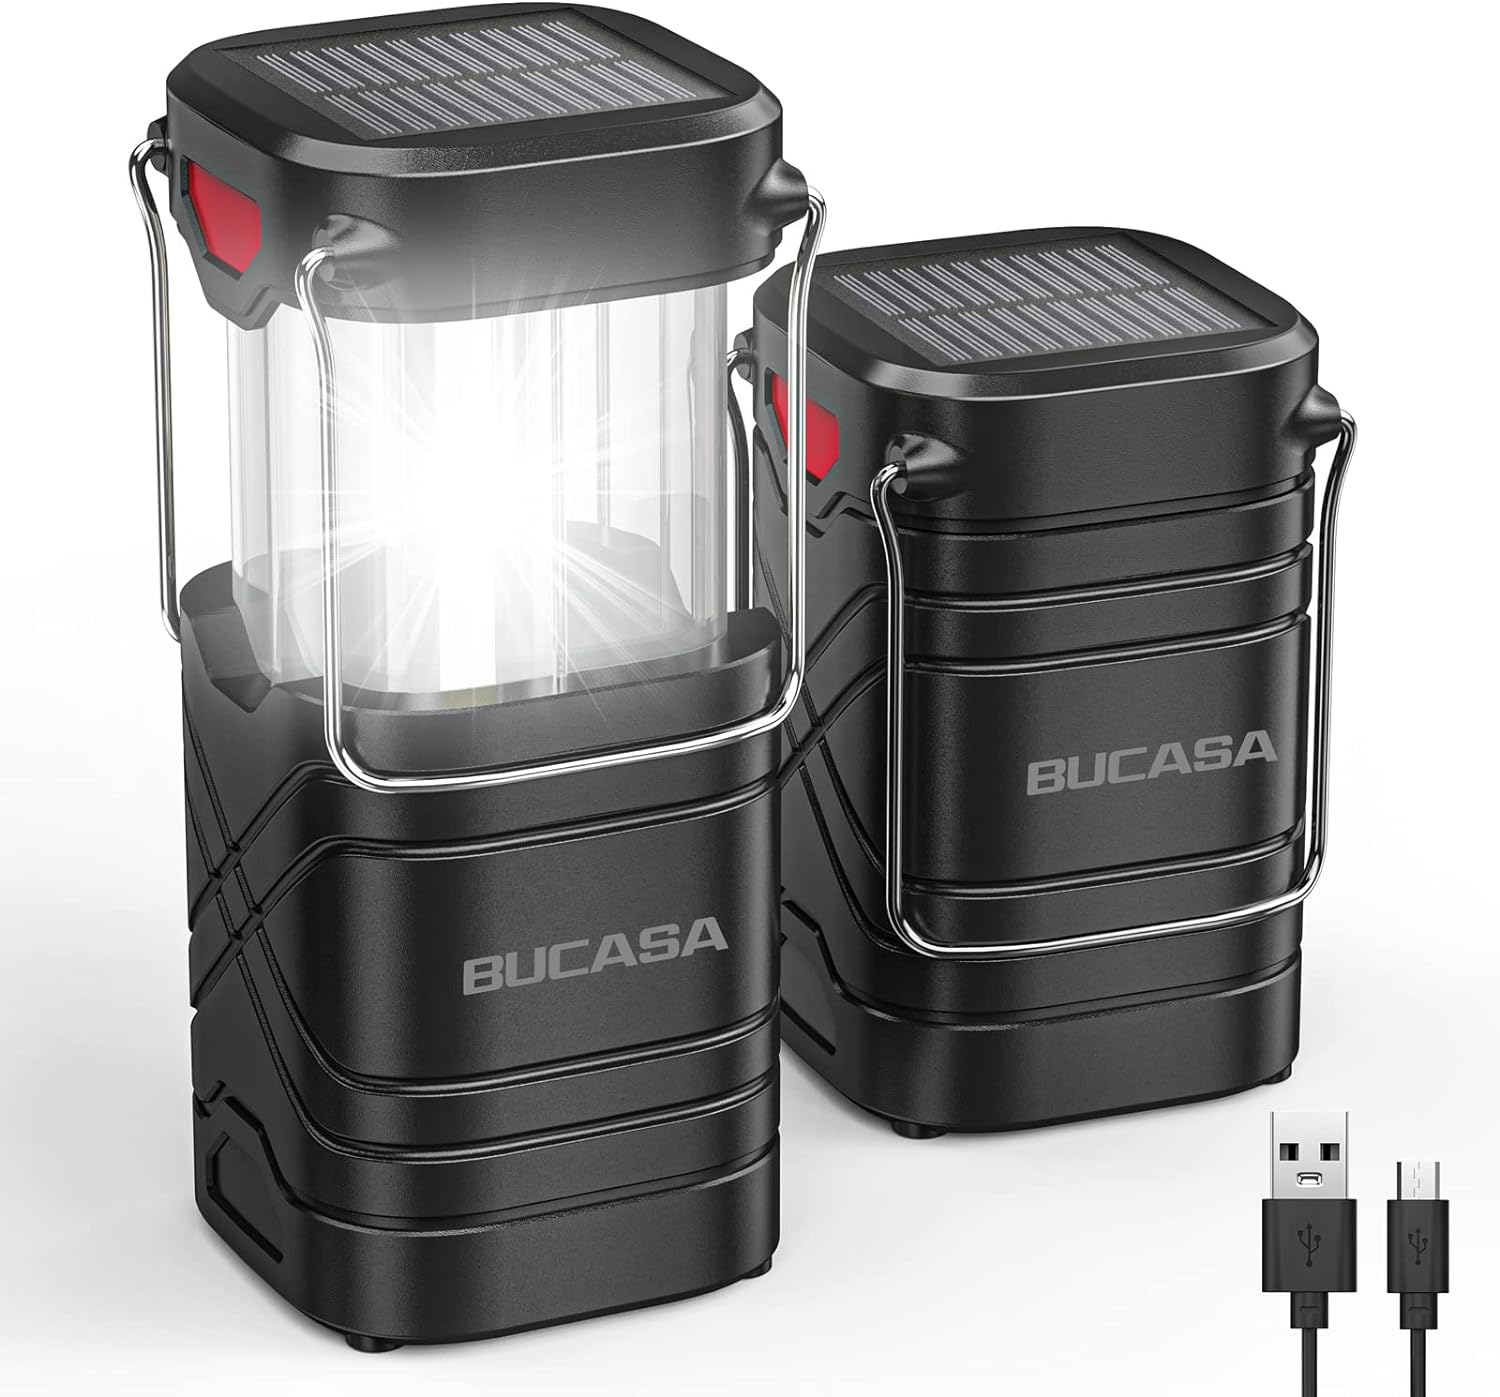 BUCASA Rechargeable Camping Lights, 2 Pack Portable Solar Camping Torch 2000 Lumen, Super Bright Collapsible Waterproof Camping Lantern for Outdoor Hiking Fishing Emergency